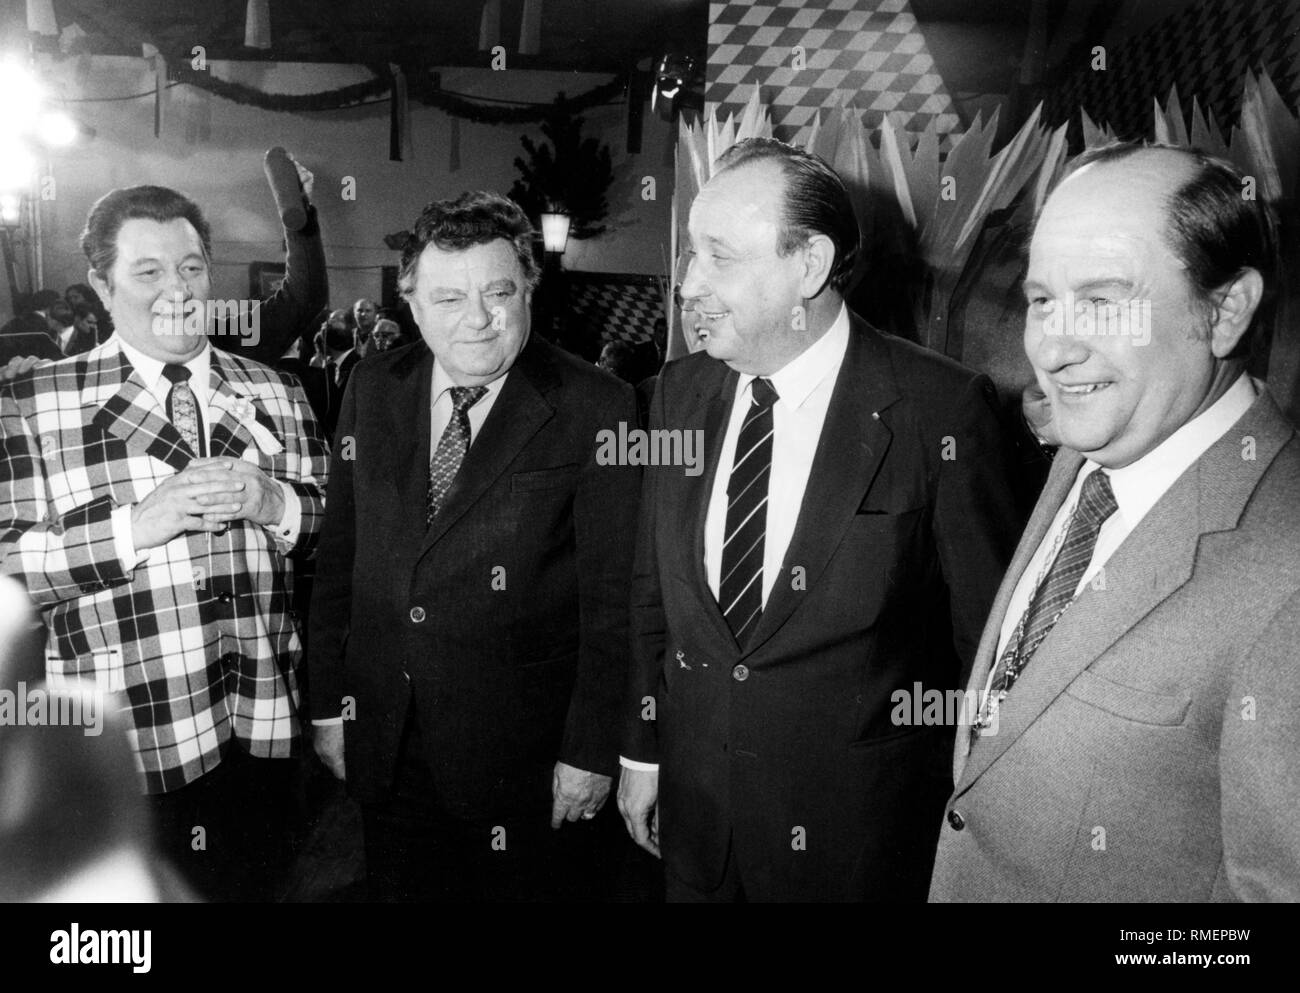 From left to right: Walter Fitz ( as Strauss), Franz Josef Strauss, Hans-Dietrich Genscher and Wastl Fitz (as Genscher) after a light opera at  the Starkbieranstich (strong beer tapping) on the Nockherberg in Munich. Stock Photo